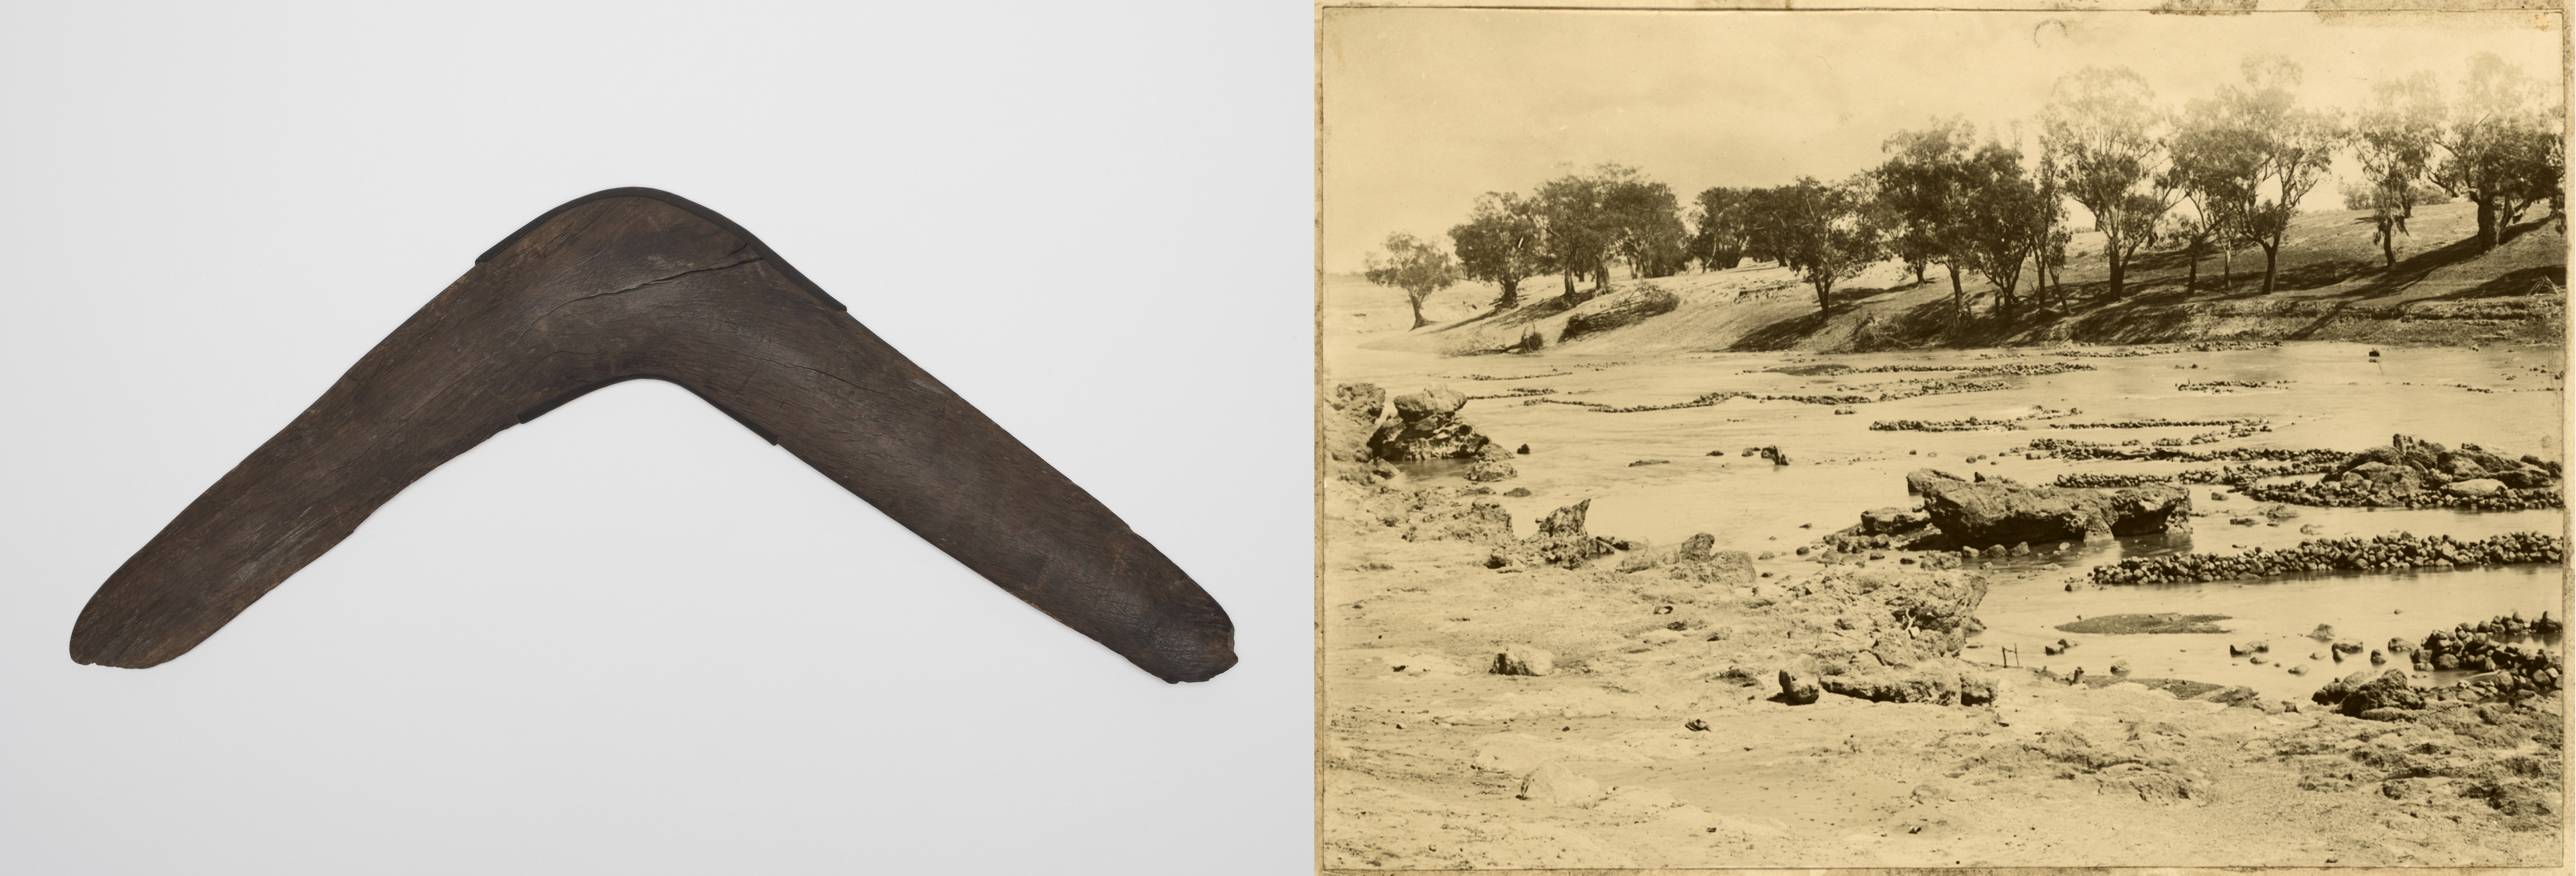 Two images side by side. Left: simple wooden boomerang. Right: sepia photograph of a river system featuring Indigenous-designed fish traps.